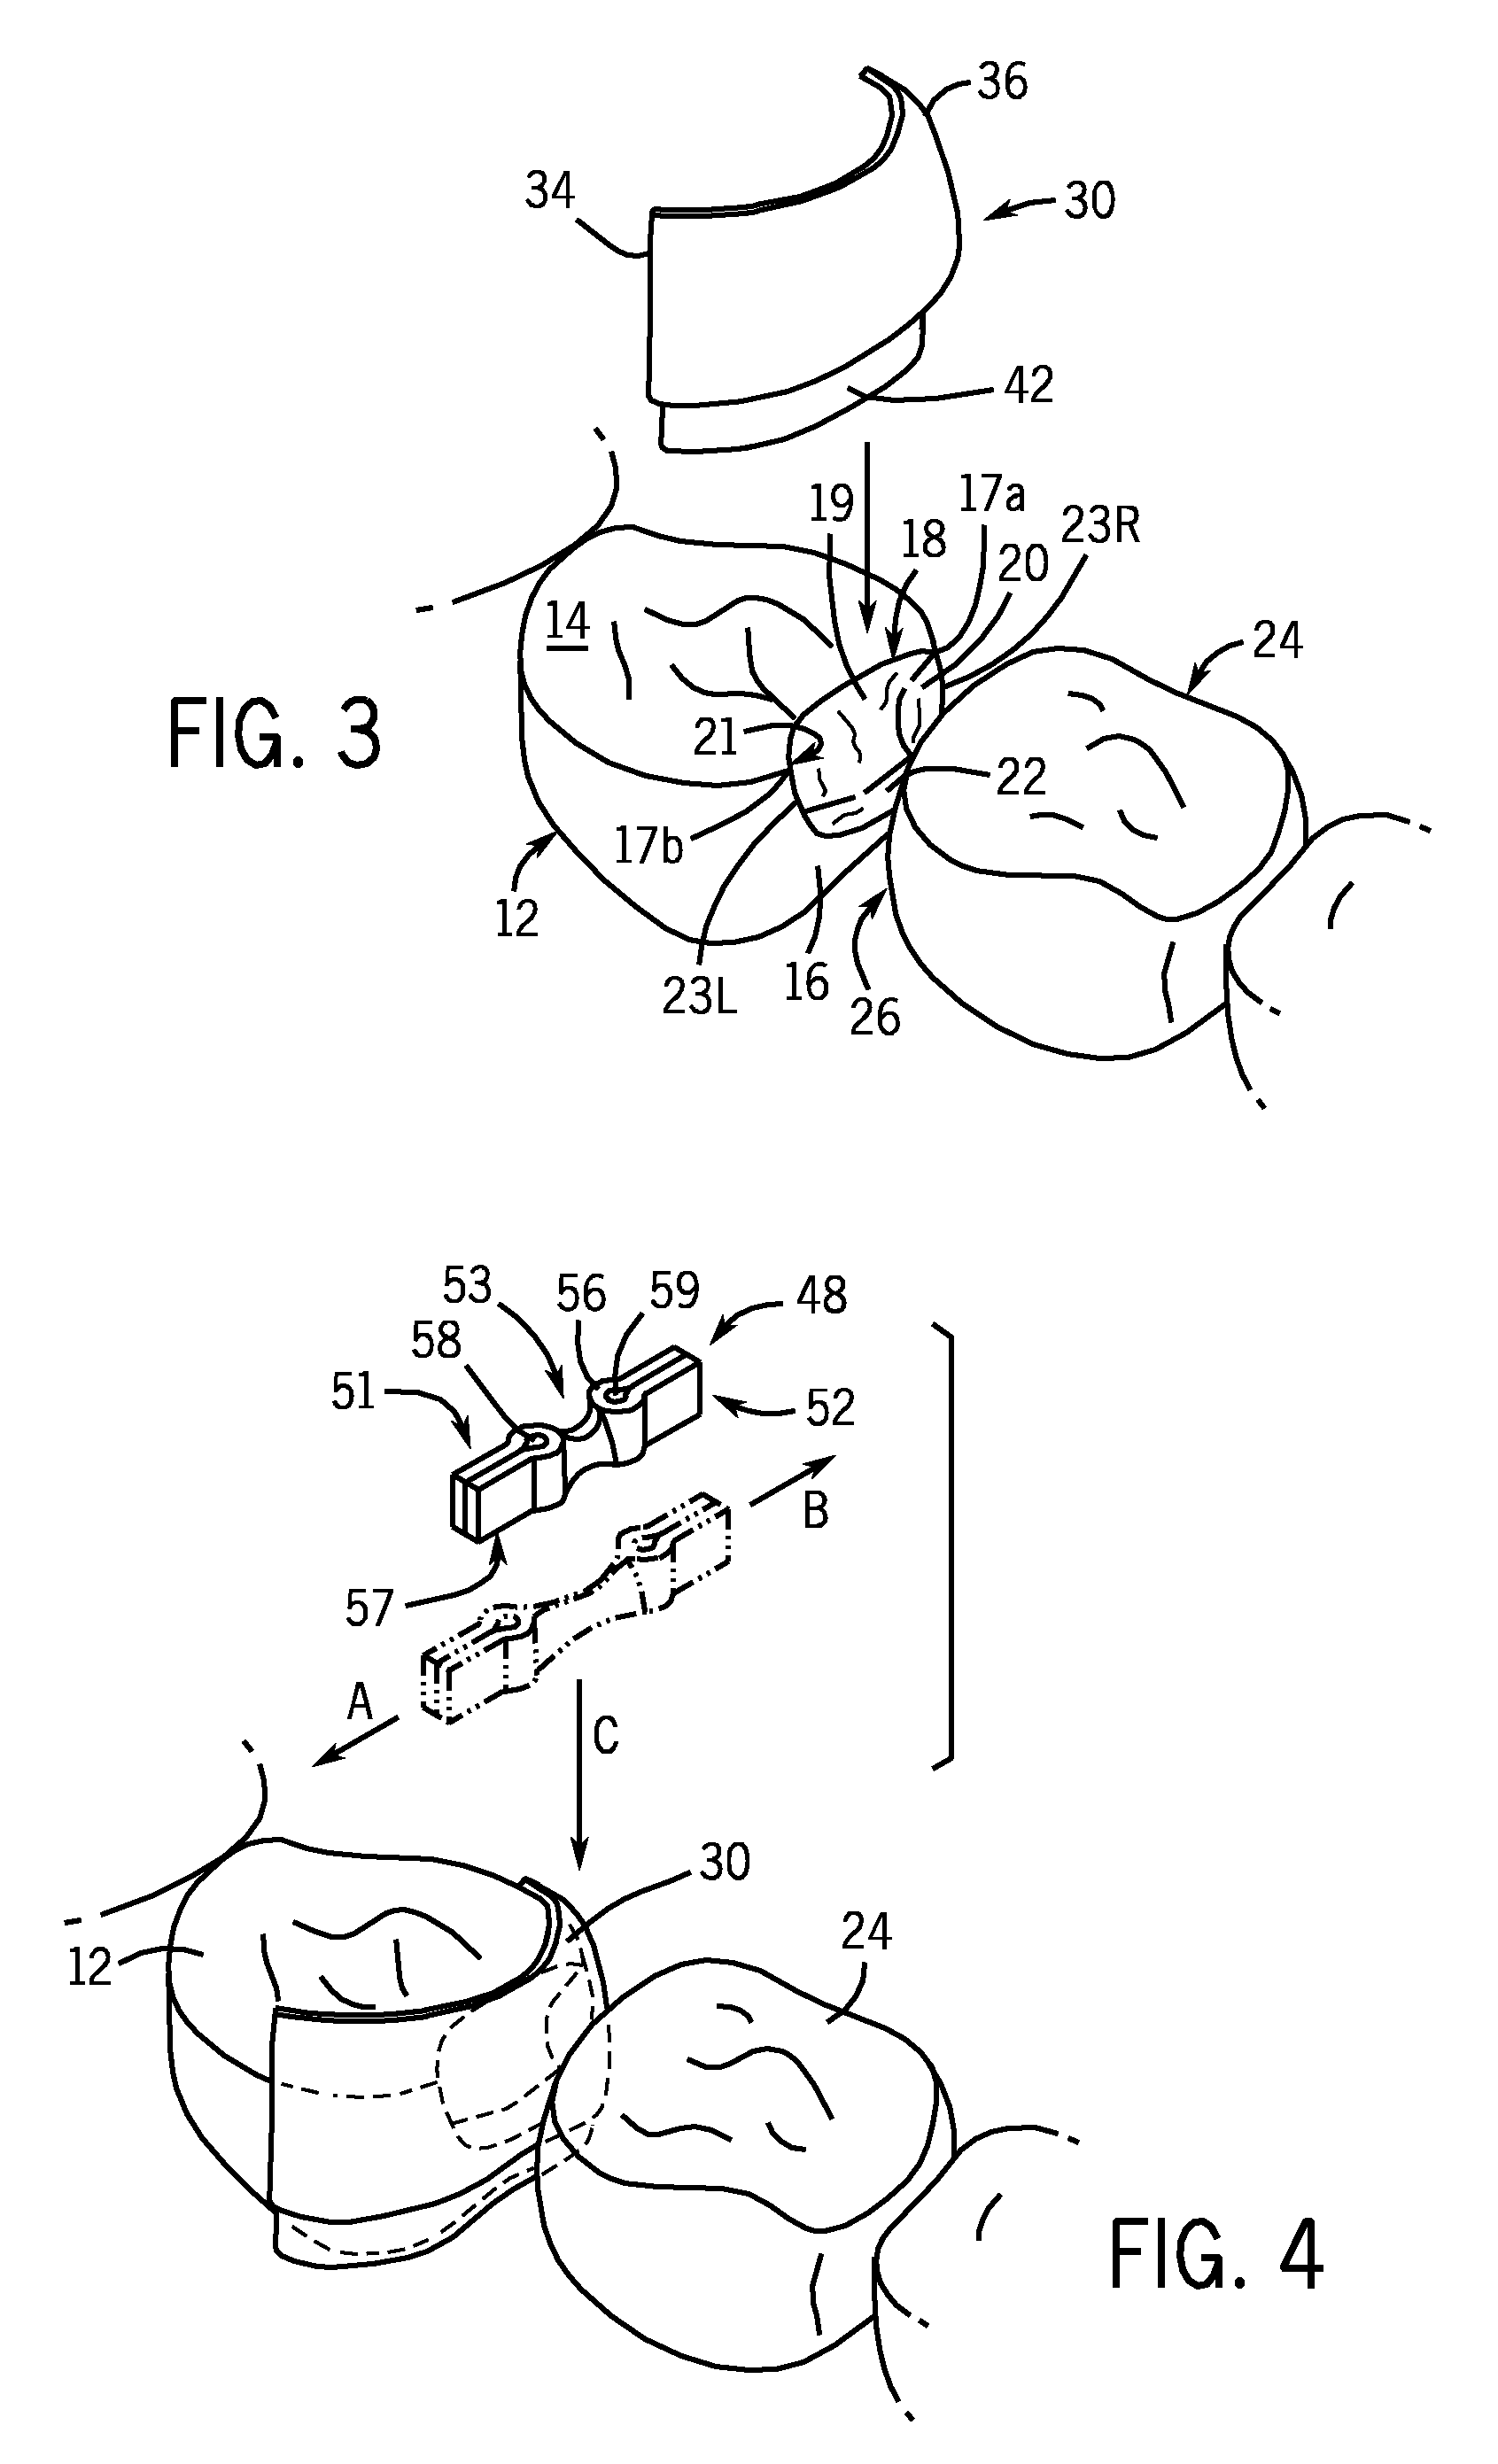 Matrix Stabilizer Devices And A Seamless, Single Load Cavity Preparation And Filling Technique